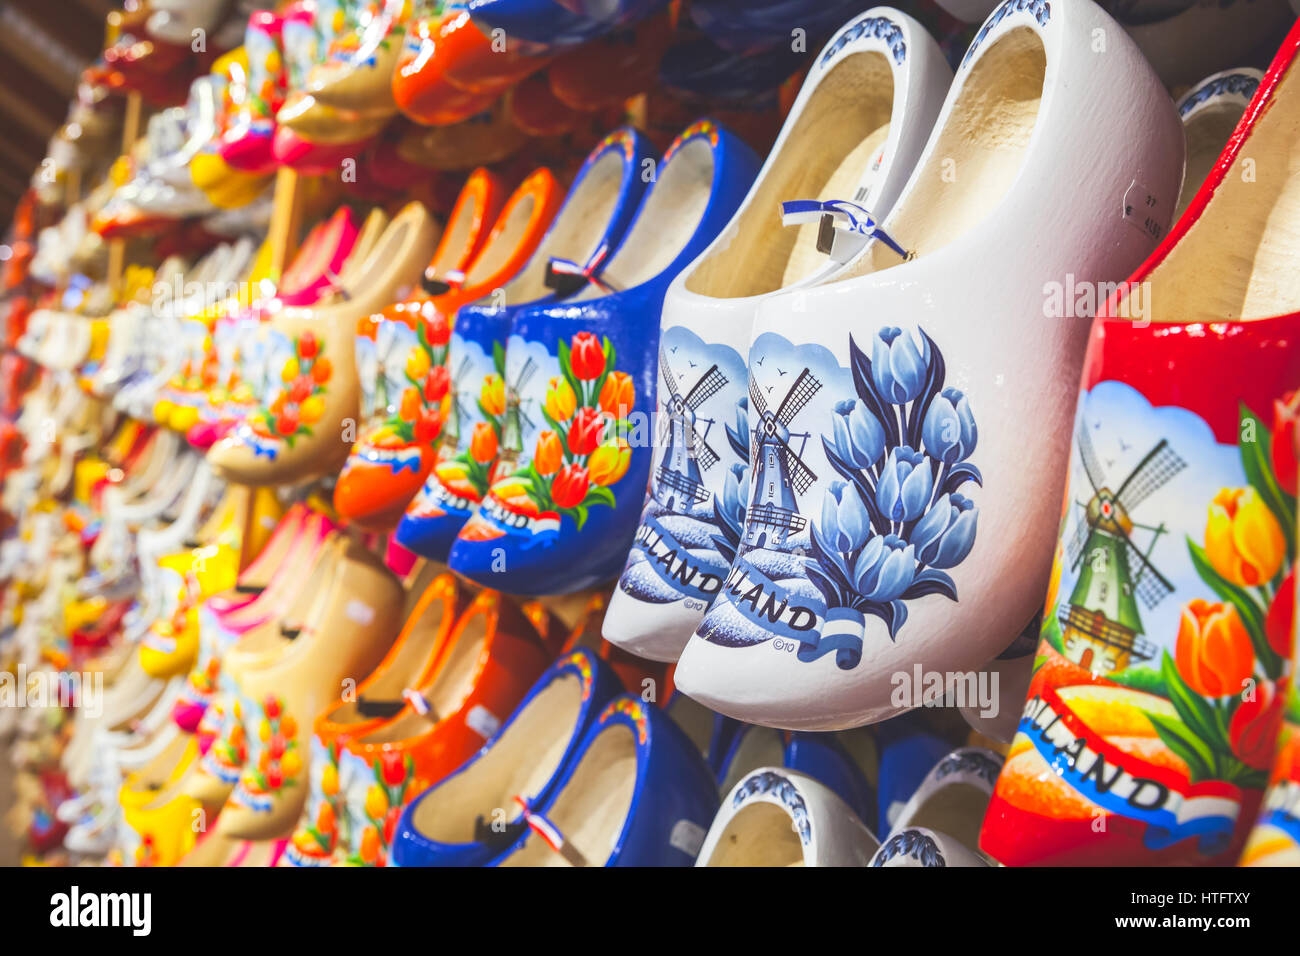 Zaanse Schans, Netherlands - February 25: Colorful Dutch clogs made of poplar wood, traditional shoes with paintings stand on souvenir shop counter Stock Photo